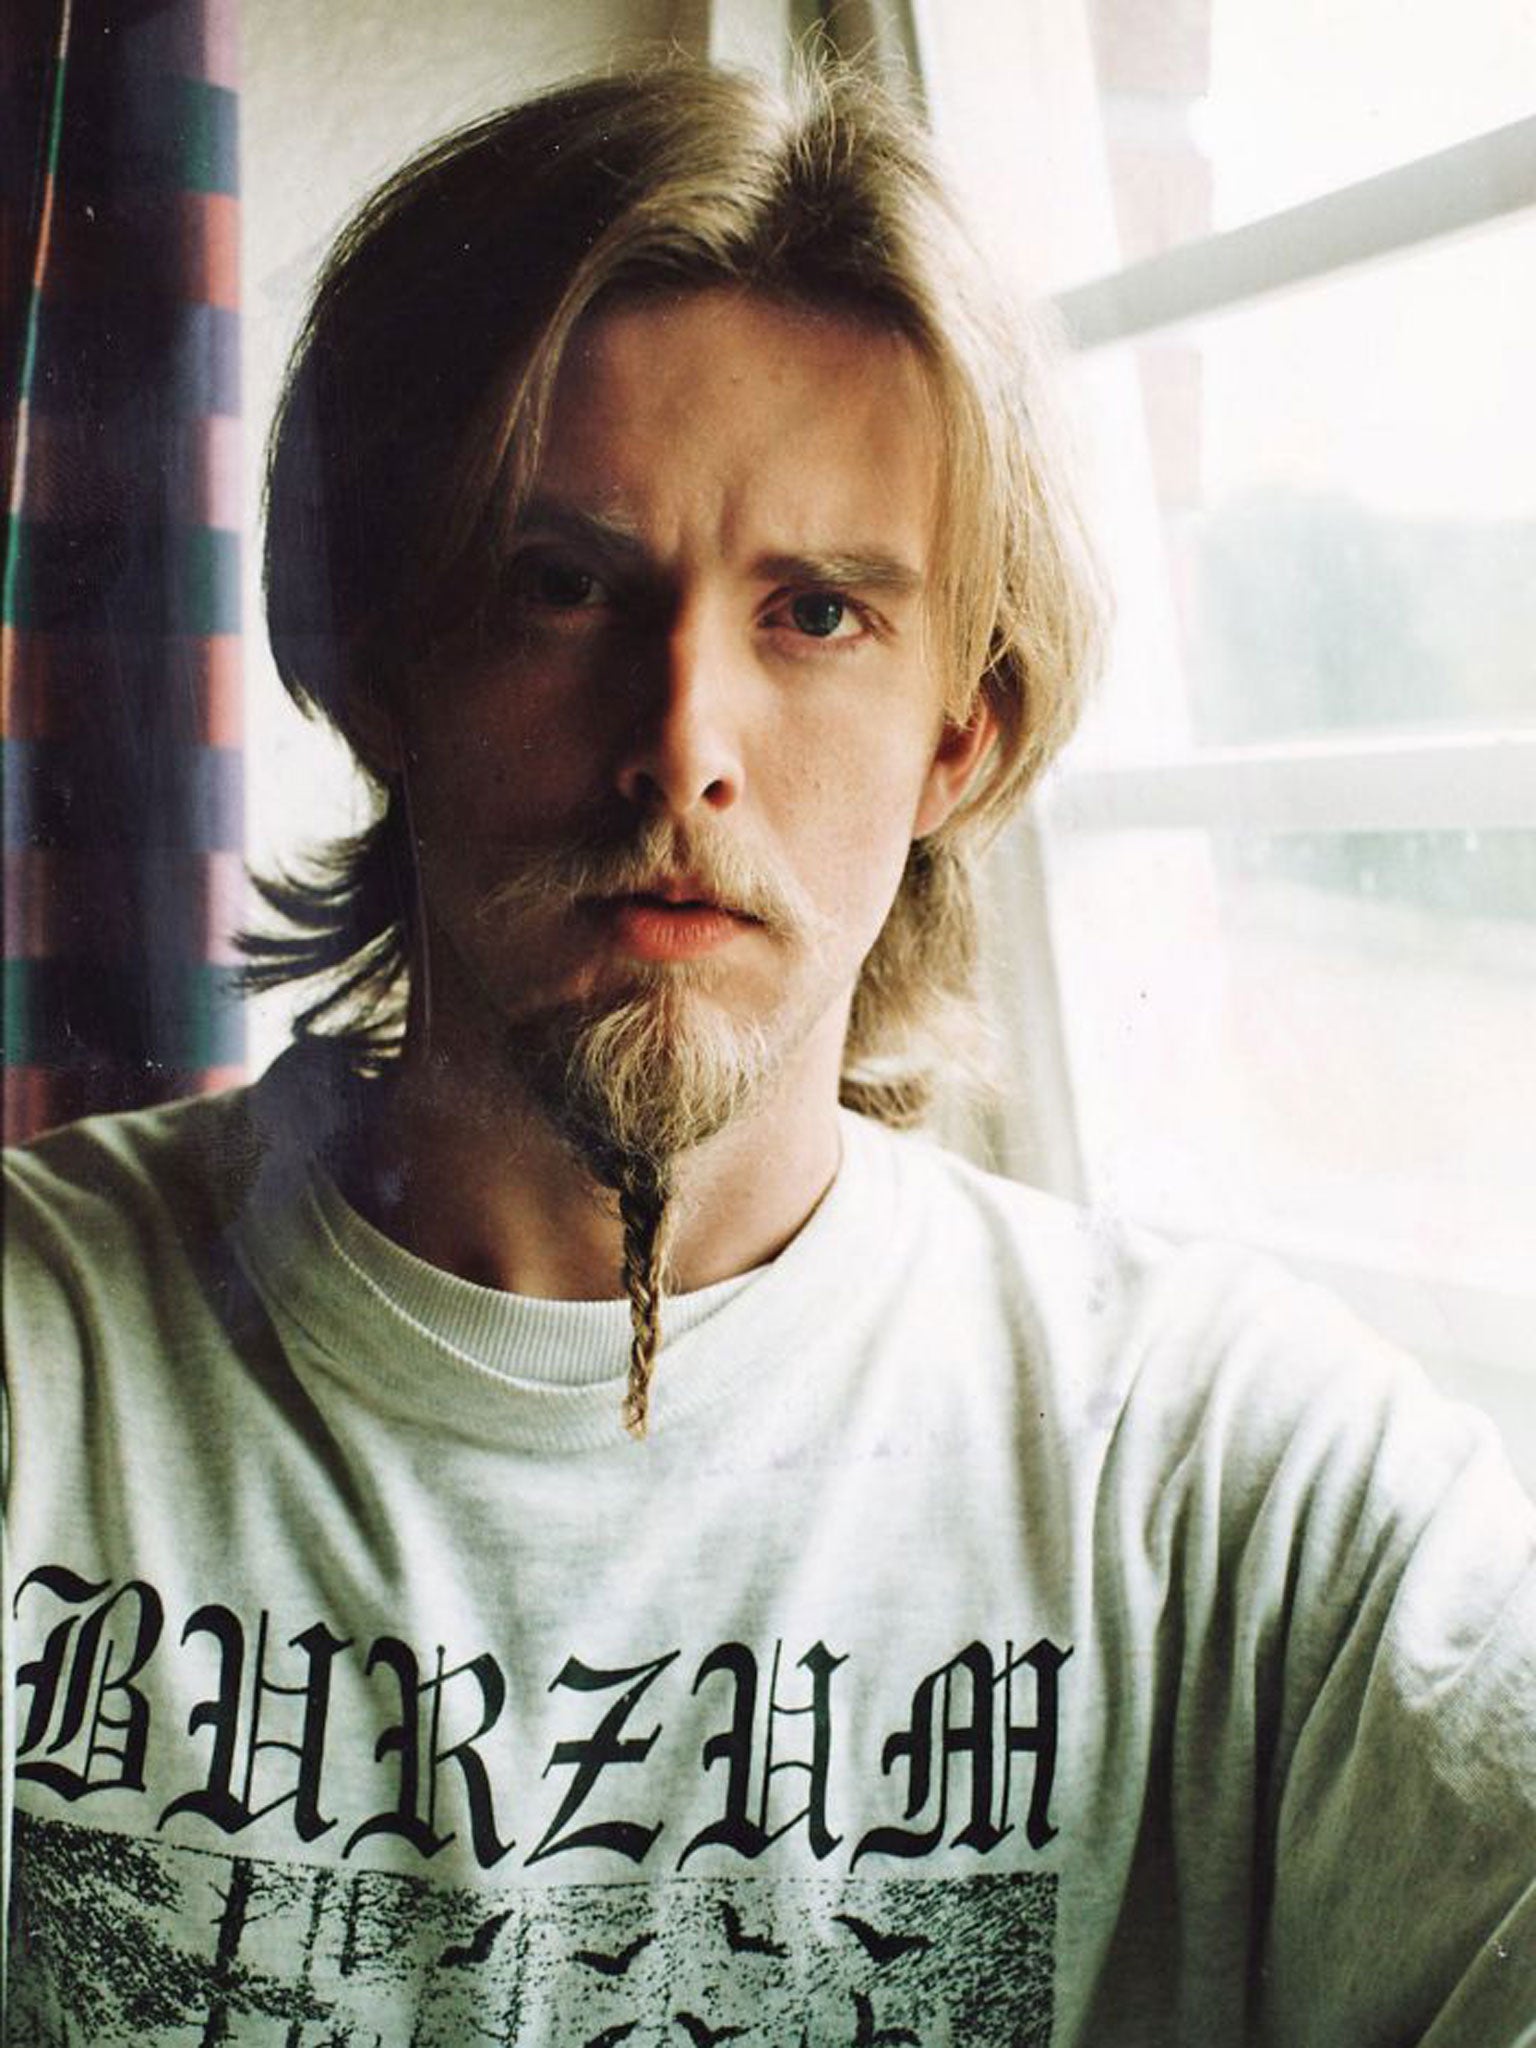 Kristian Vikernes settled in France with his family in 2009 after spending 15 years in prison for murder